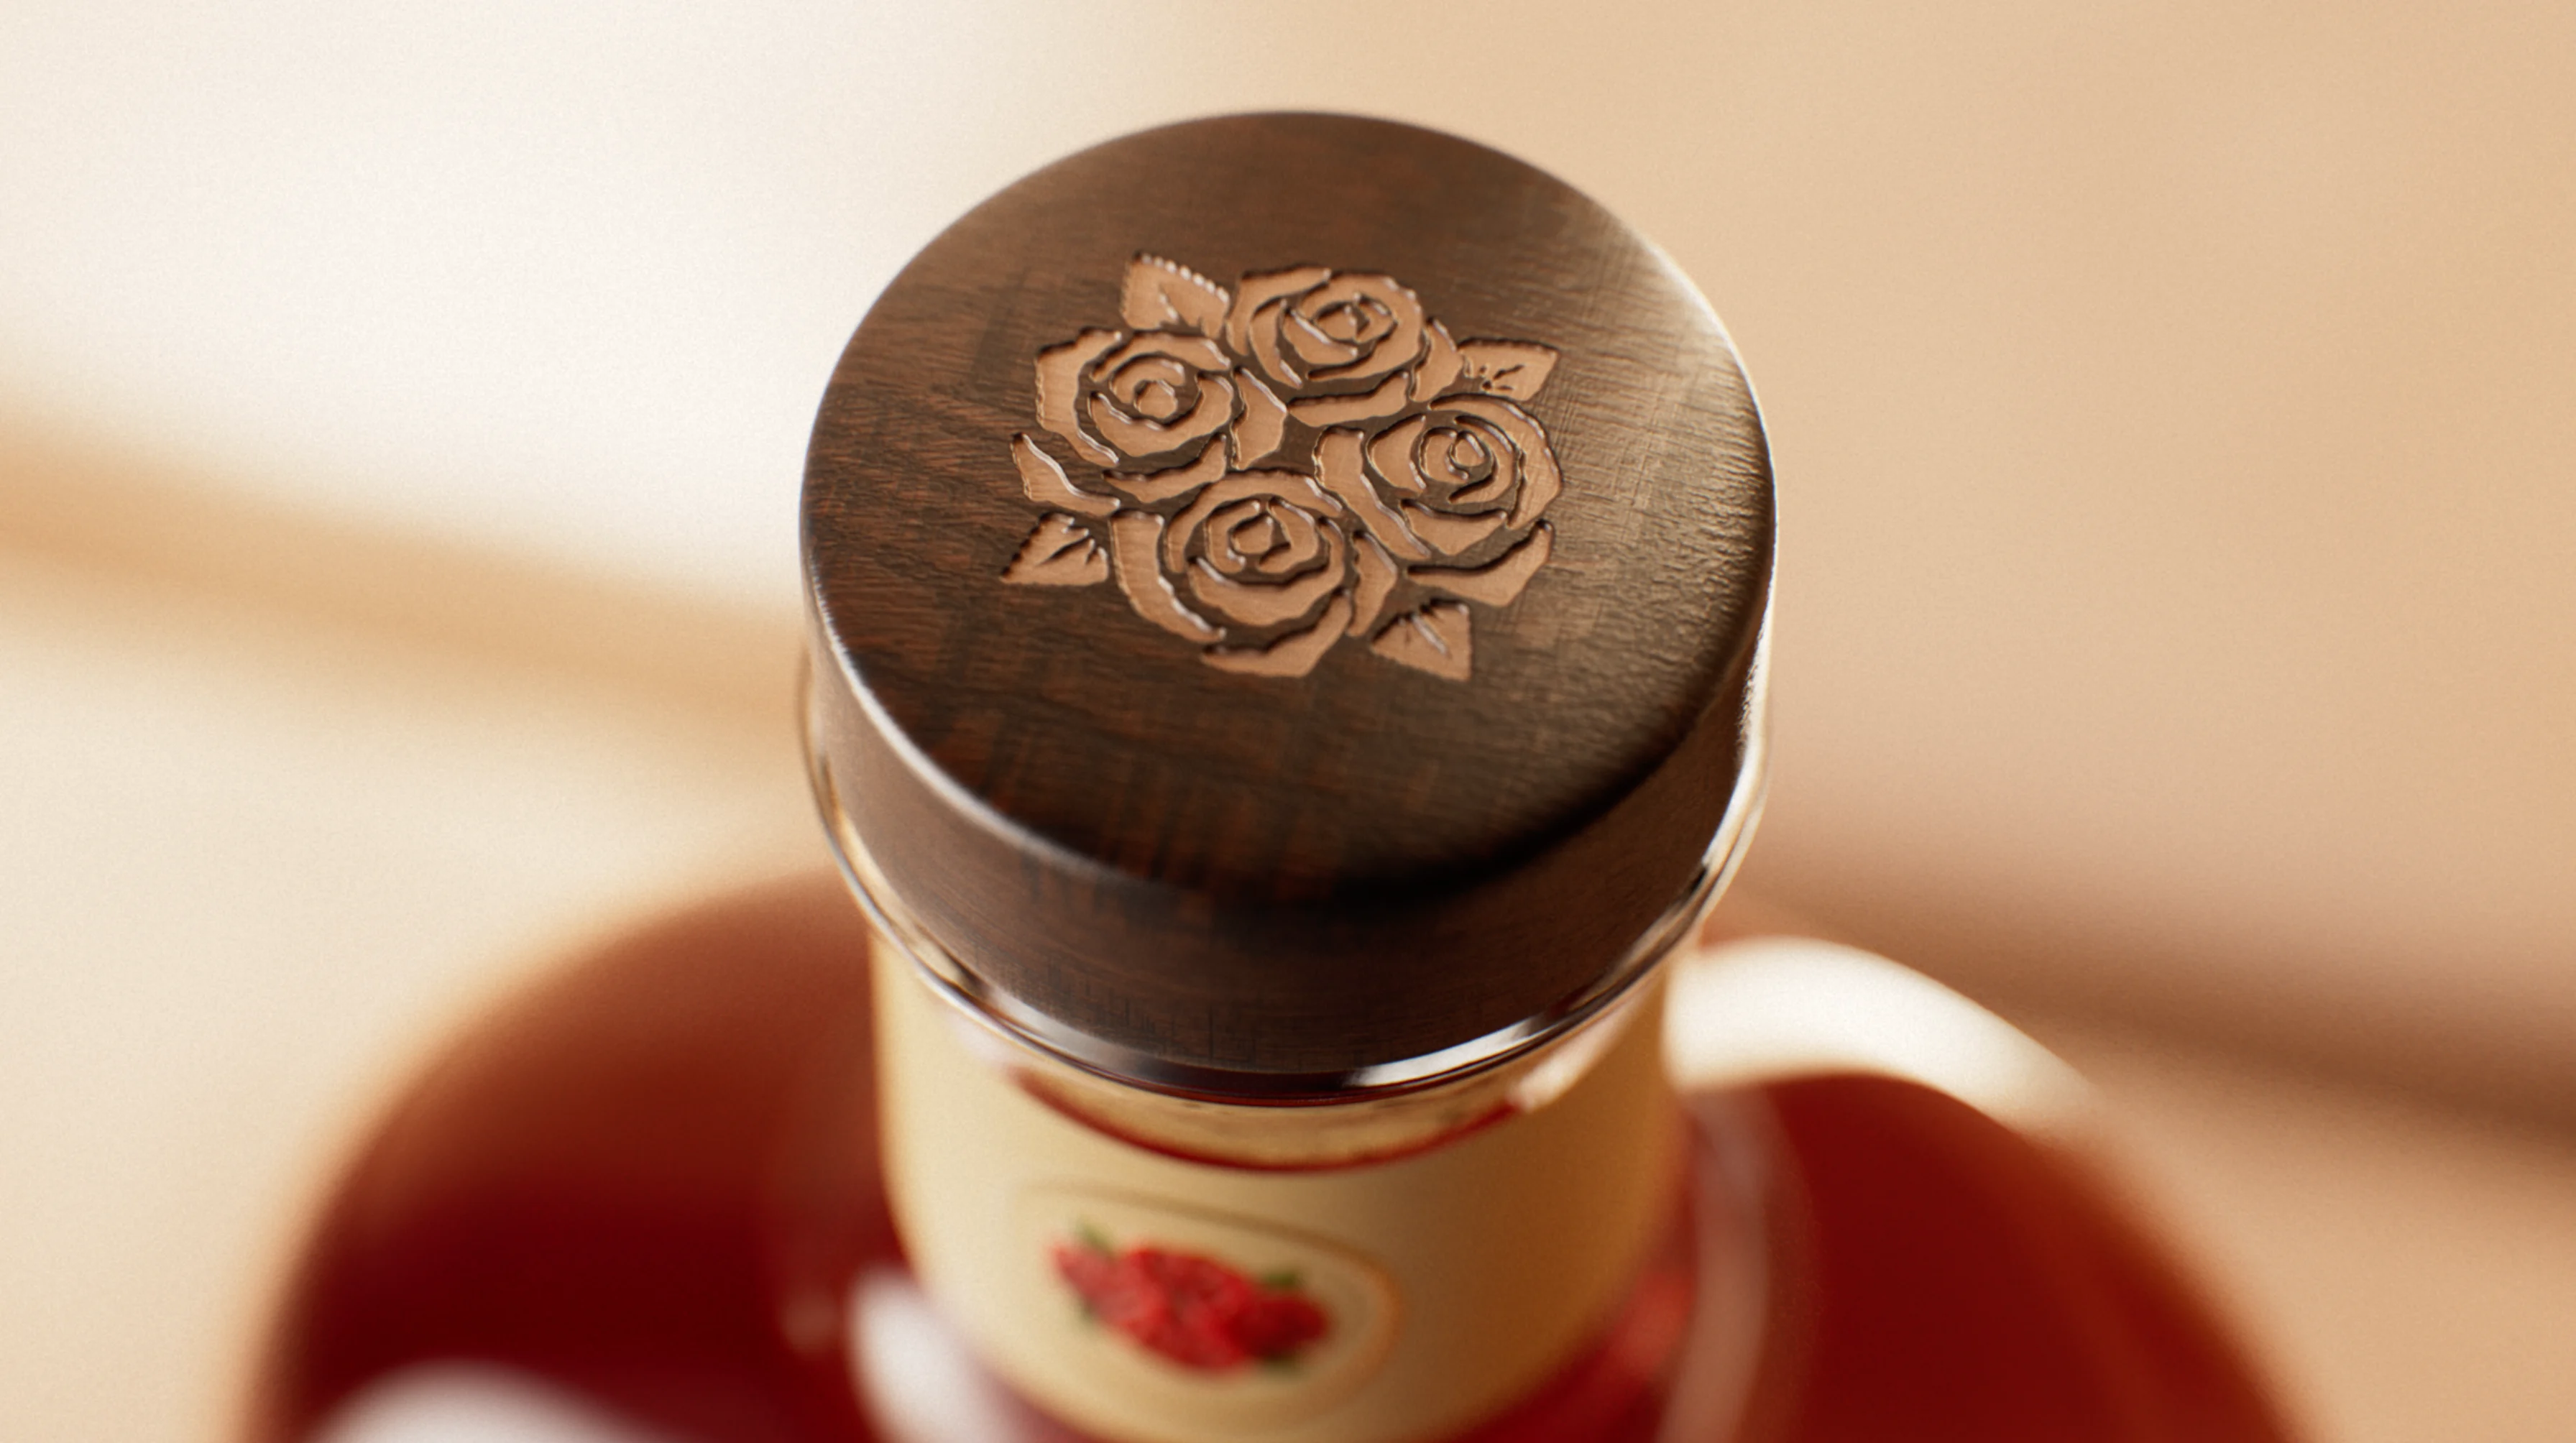 Bottle cap with etched Four Roses design